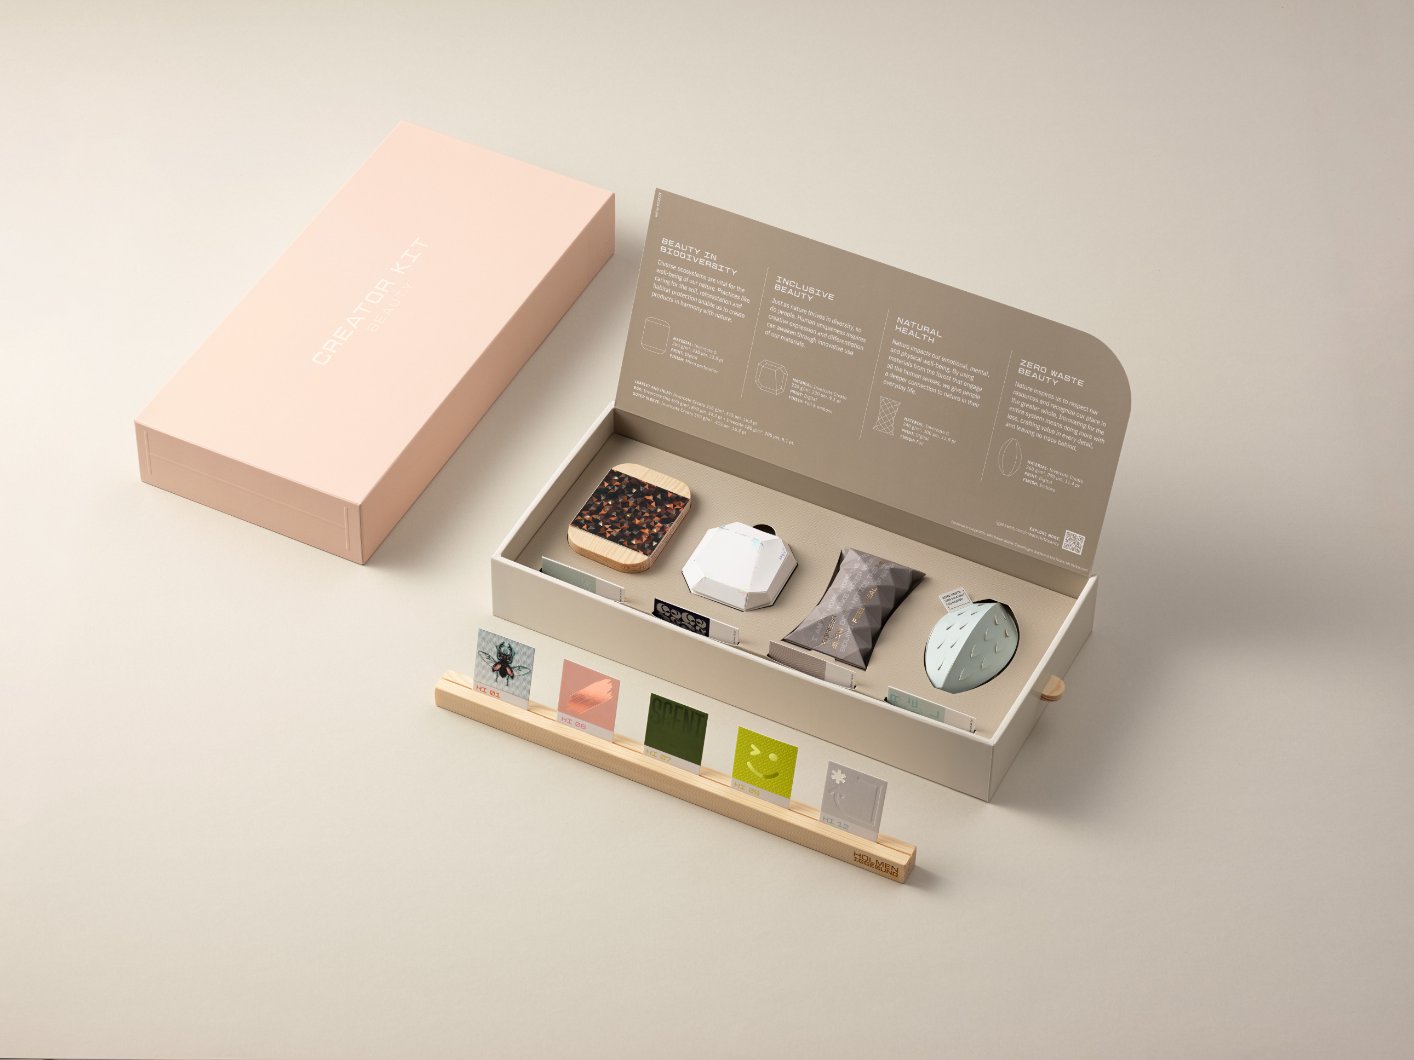 Holmen Iggesund’s New Beauty Kit is an Invitation to Create Together